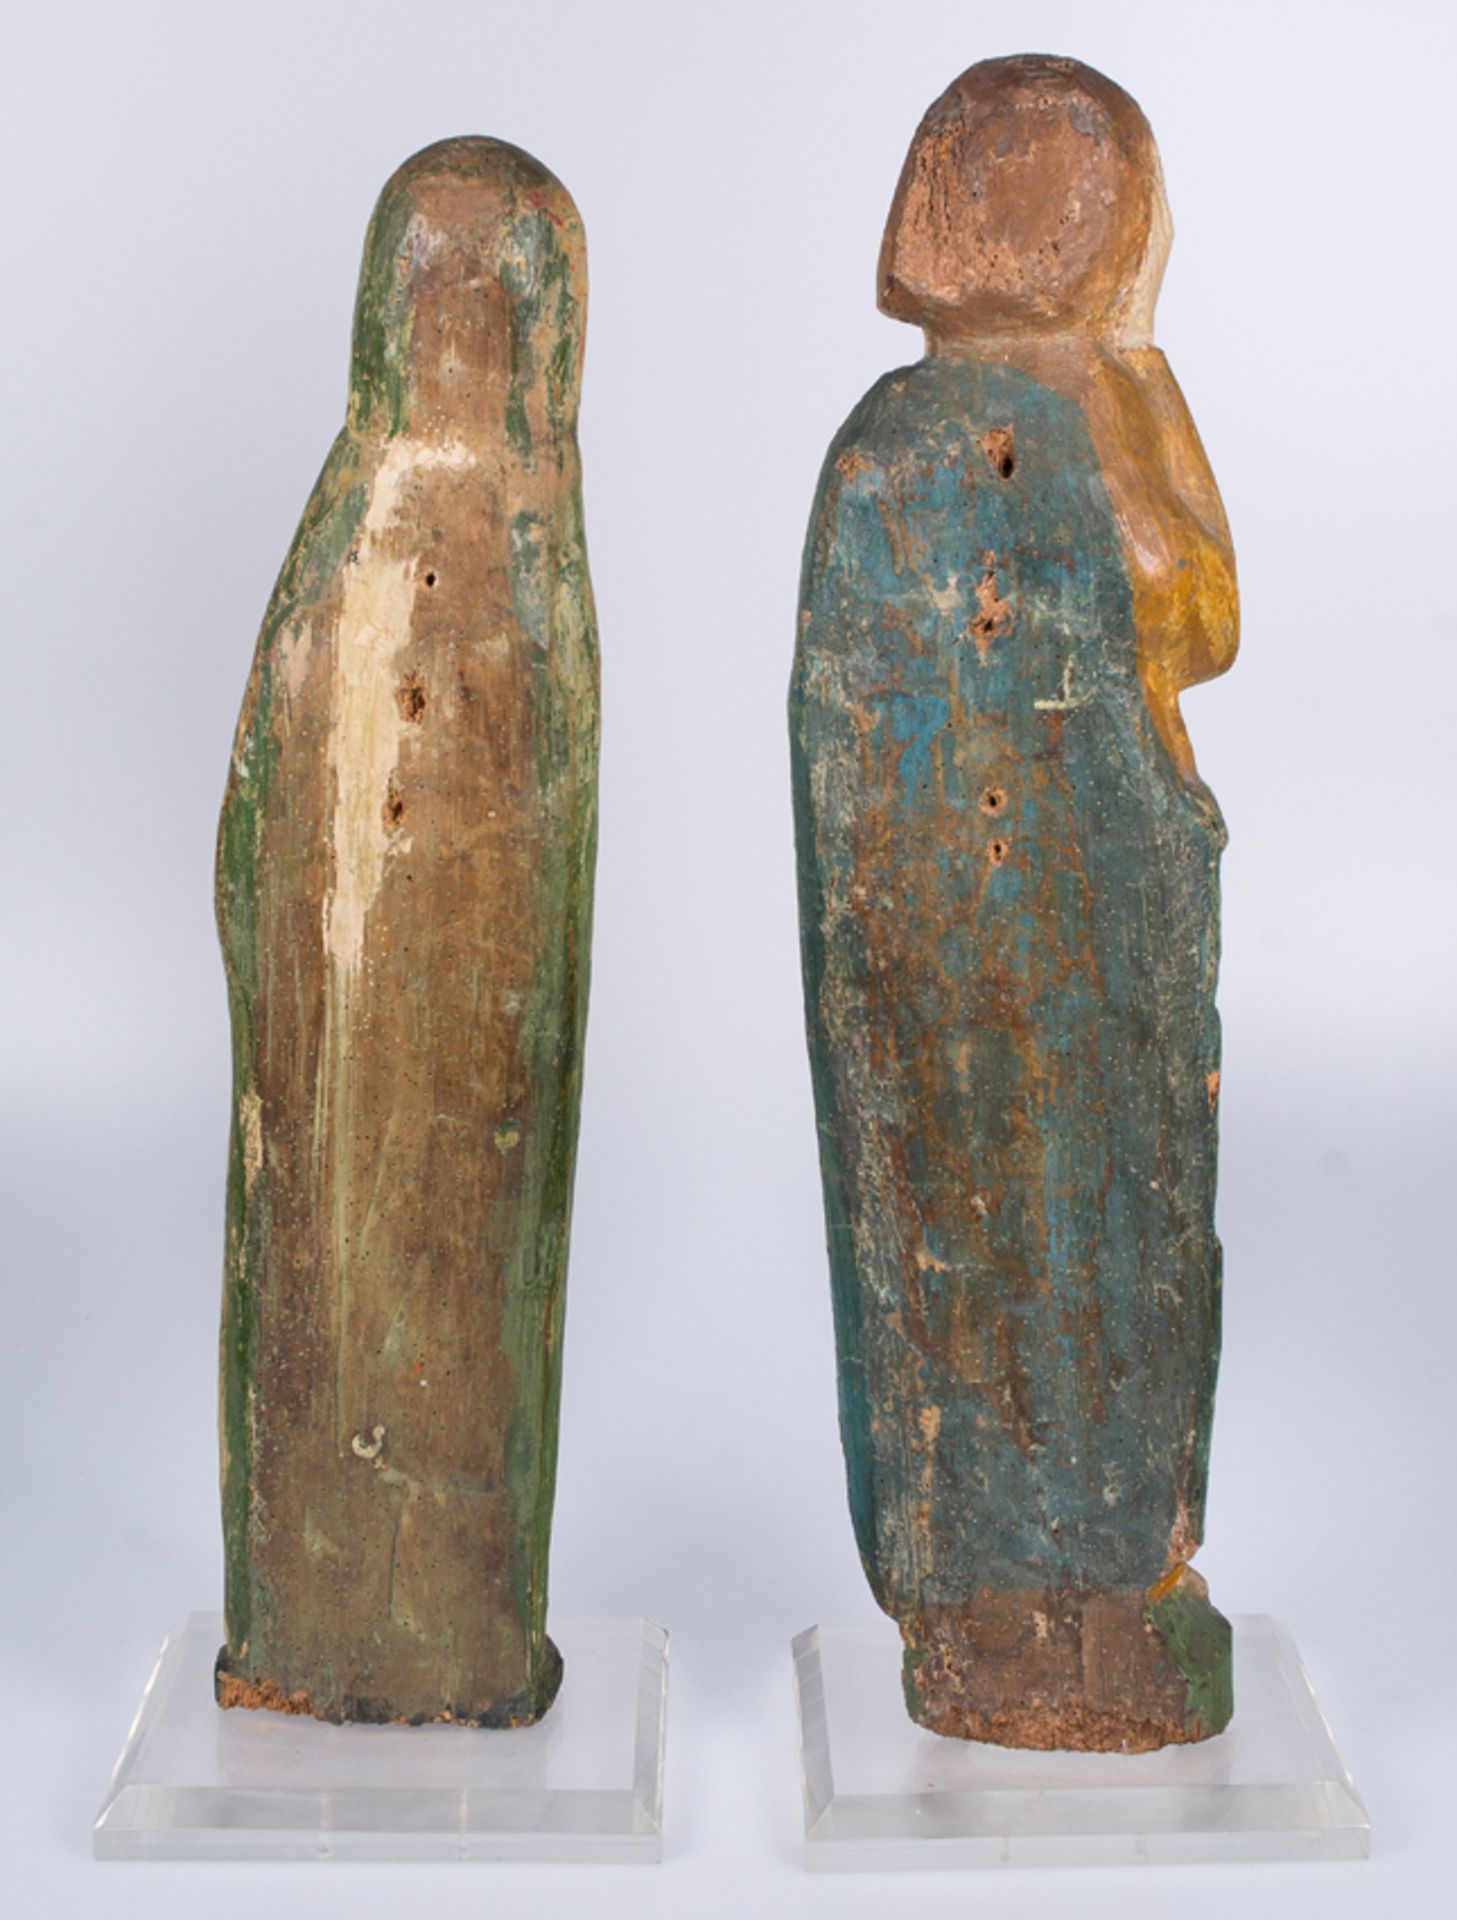 "The Virgin Mary" and "Saint John". Pair of wooden sculptures. ¿Castilian workshop? Late 13th cent. - Image 7 of 7